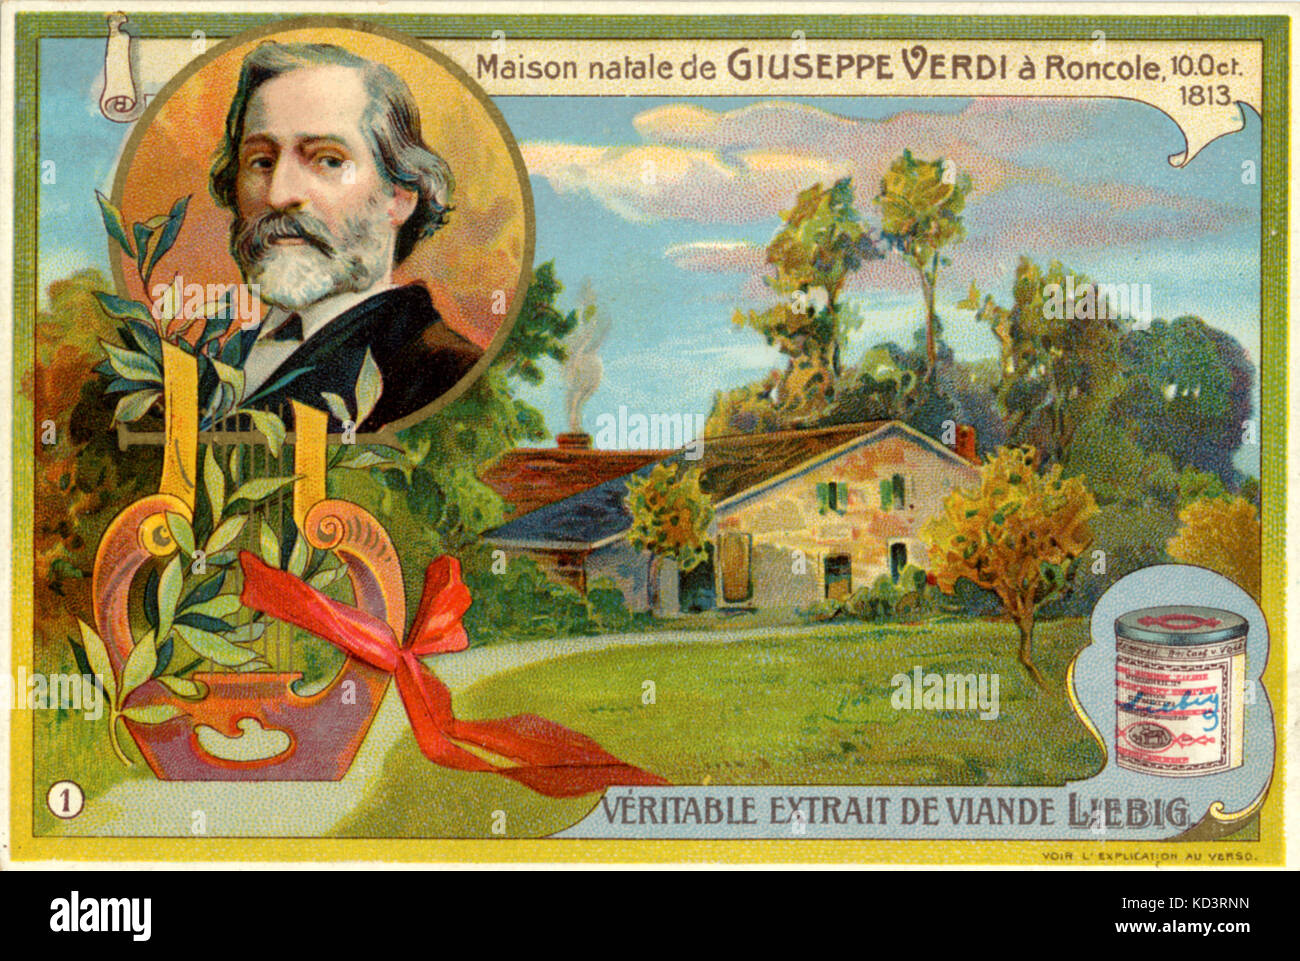 Giuseppe Verdi 's 'Birthplace & home at Roncole 10th October 1813'.  Advertisement for Viande Liebig extract showing the composer's portrait in medallion.   Italian composer (1813-1901). Stock Photo